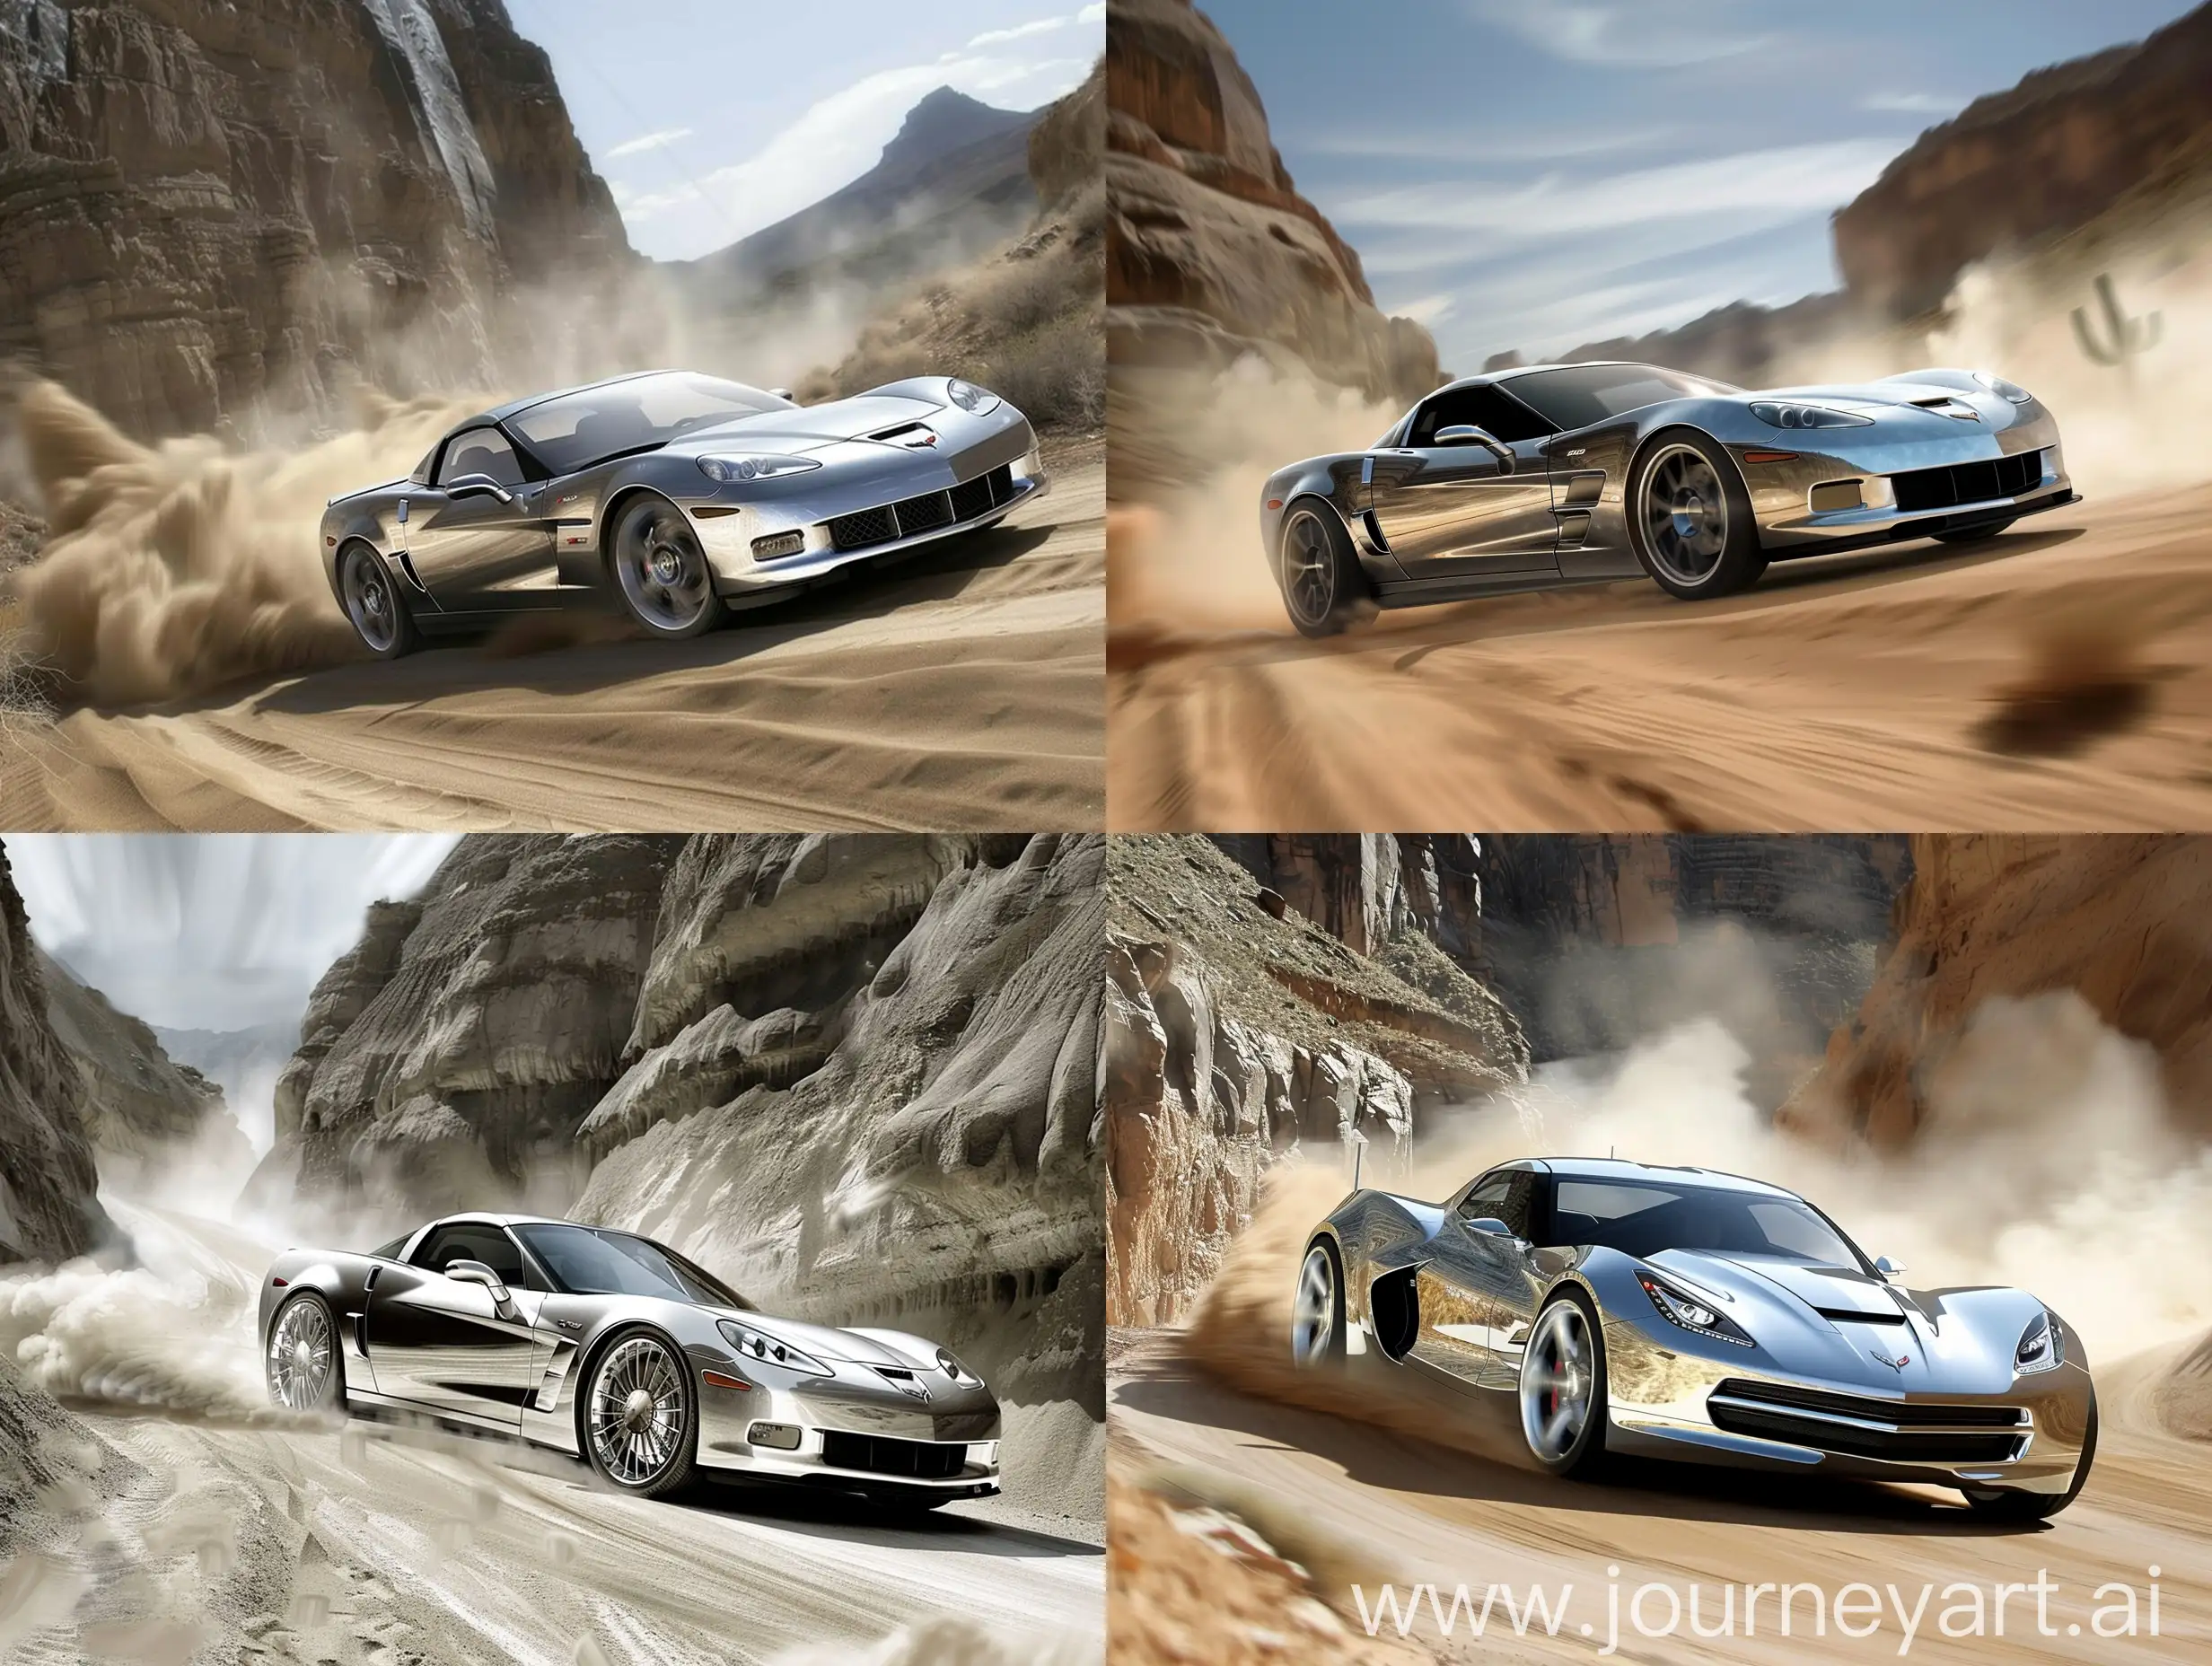 2009 Chevrolet Corvette Stingray Concept going fast in the canyon, dust and smoke coming out illustration drawing, illustration wallpaper style gray color chrome painted 2009 Chevrolet Corvette Stingray Concept Illustration